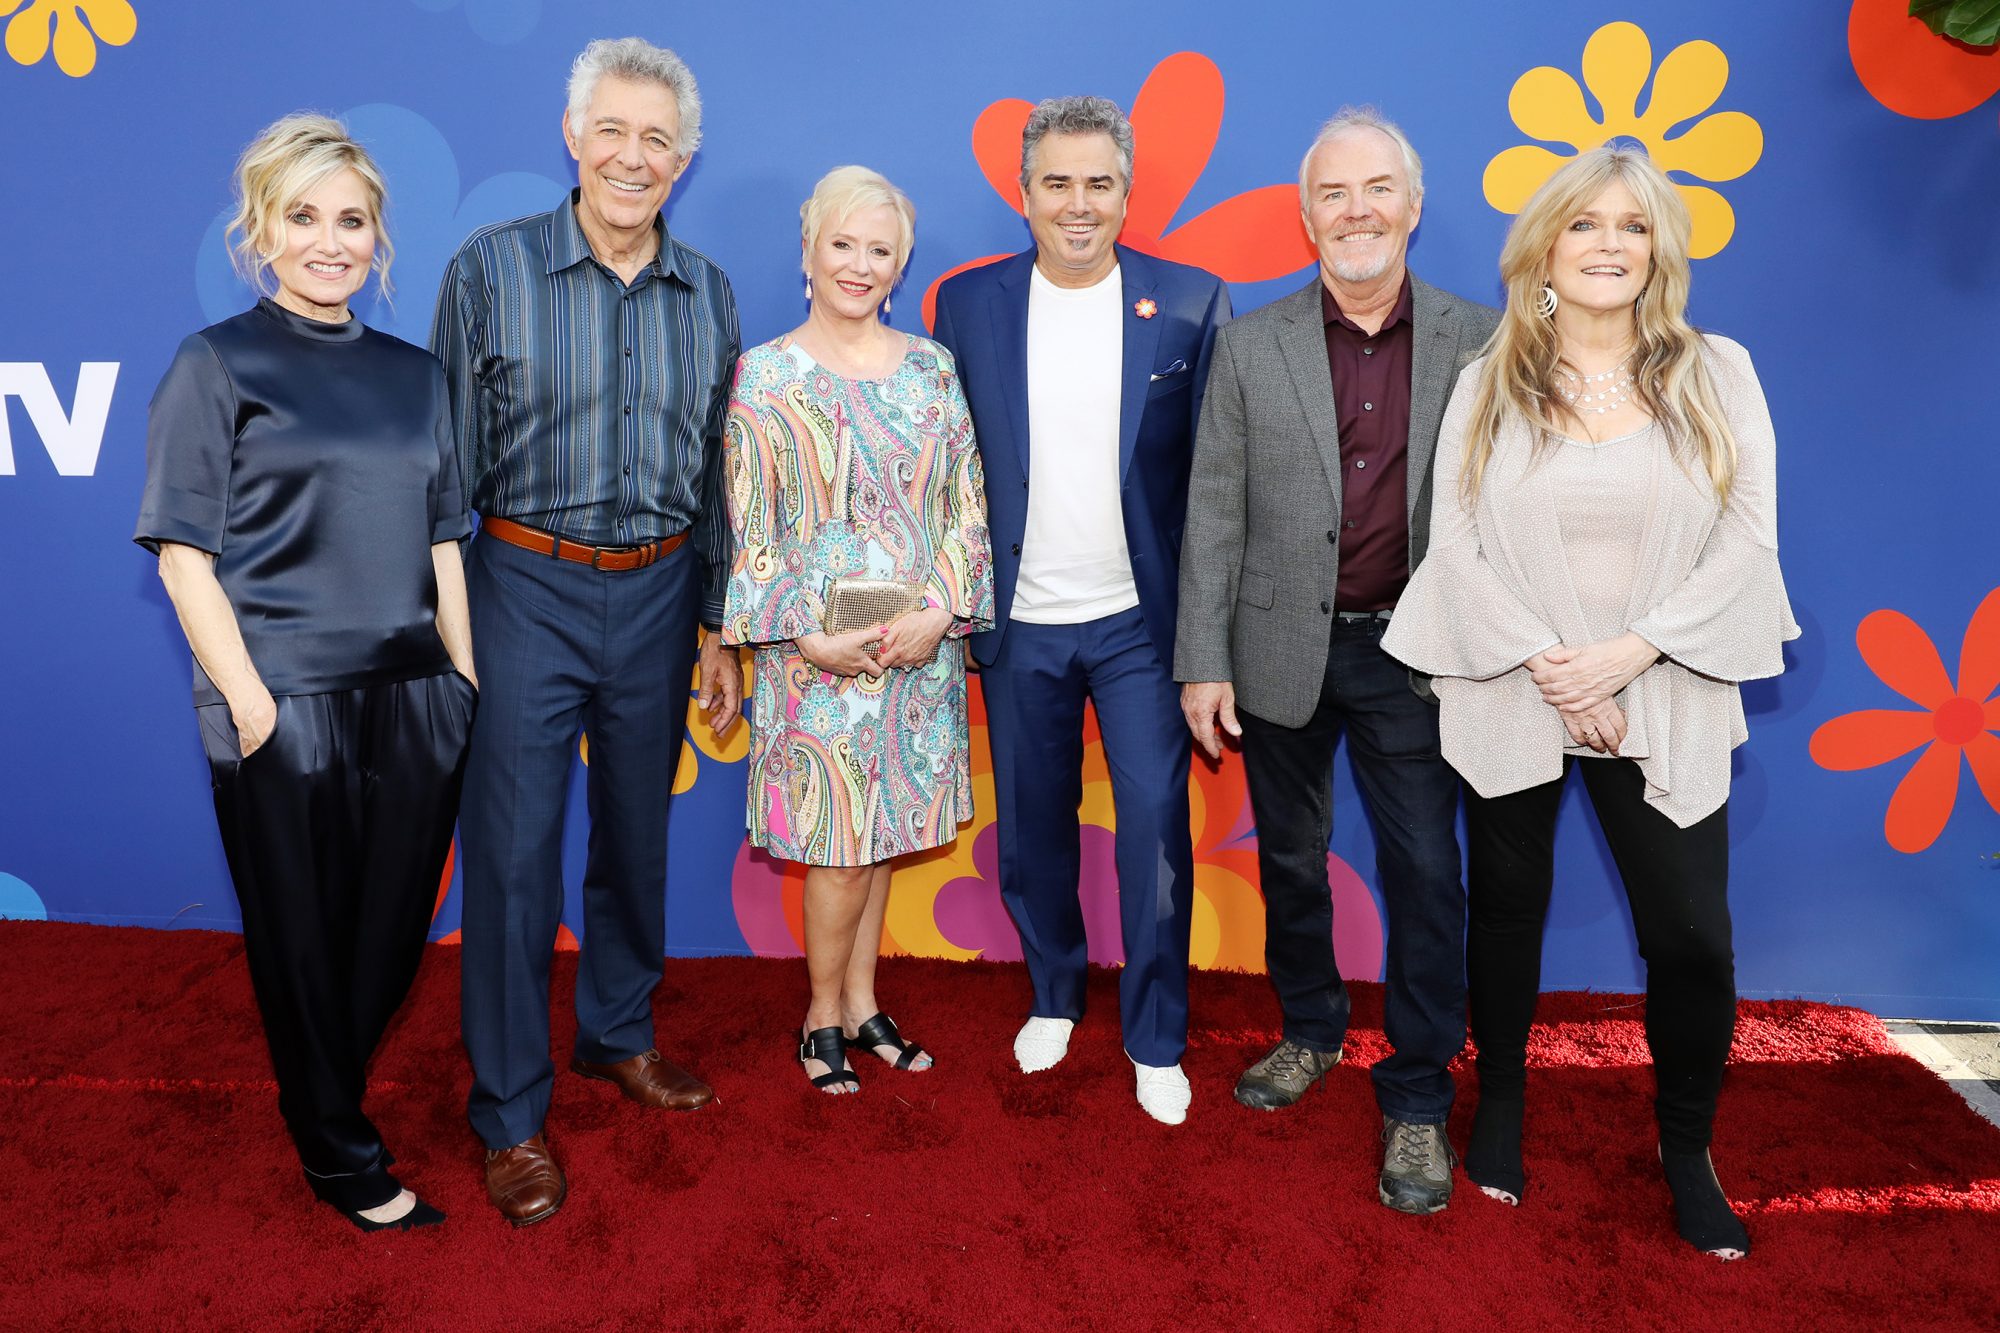 The Brady Bunch Barry Williams Dated His TV Mother Florence Henderson and Had an Affair With Maureen McCormick!